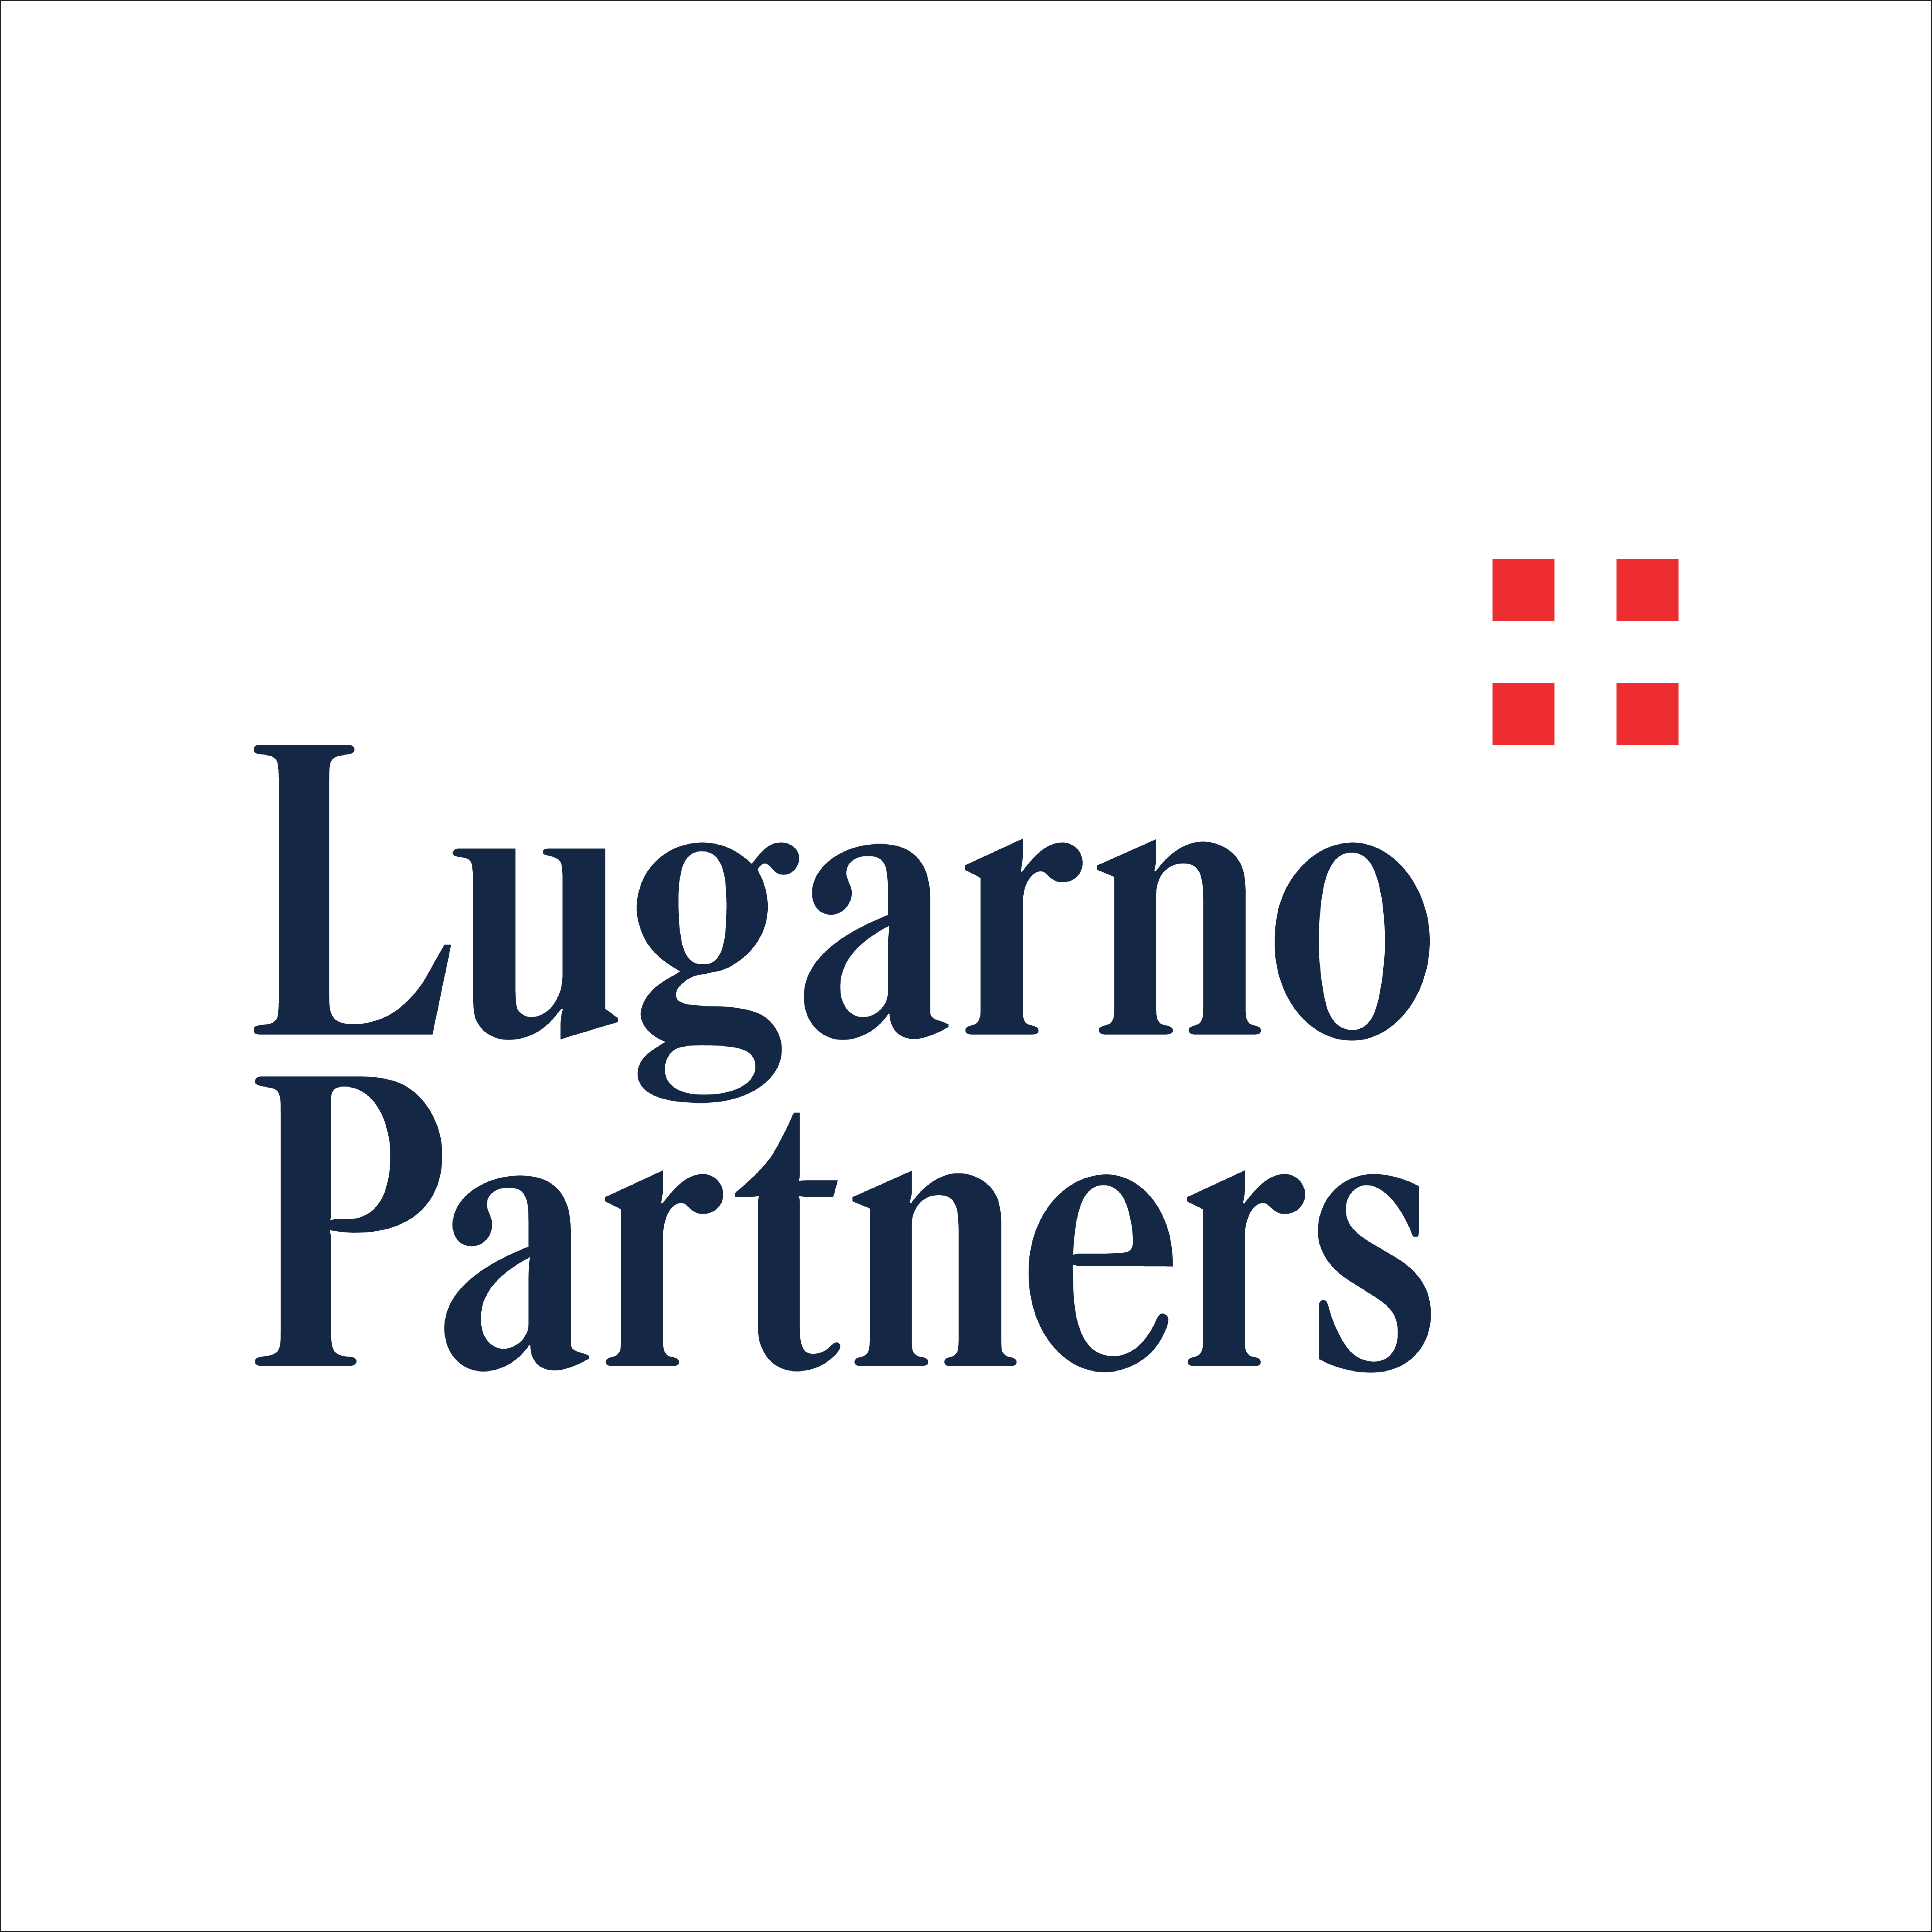 Lugarno Partners Brand Identity logo design by logo designer DSR Branding for your inspiration and for the worlds largest logo competition